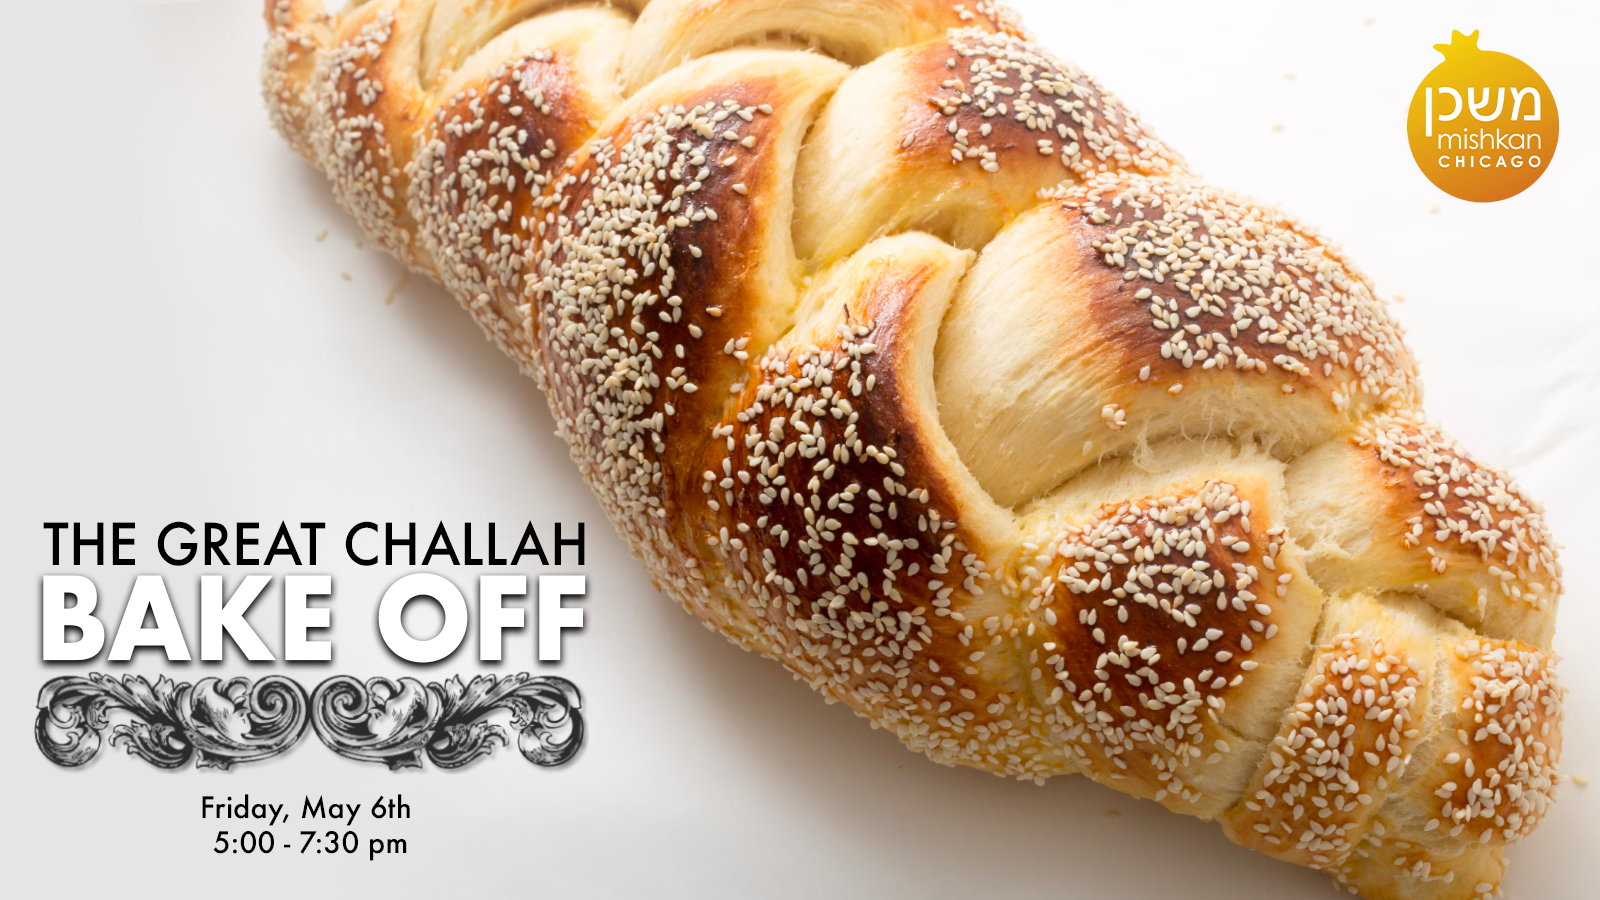 The Great Challah Bake Off, a fun Shabbat plan in Chicago on May 6, 2022